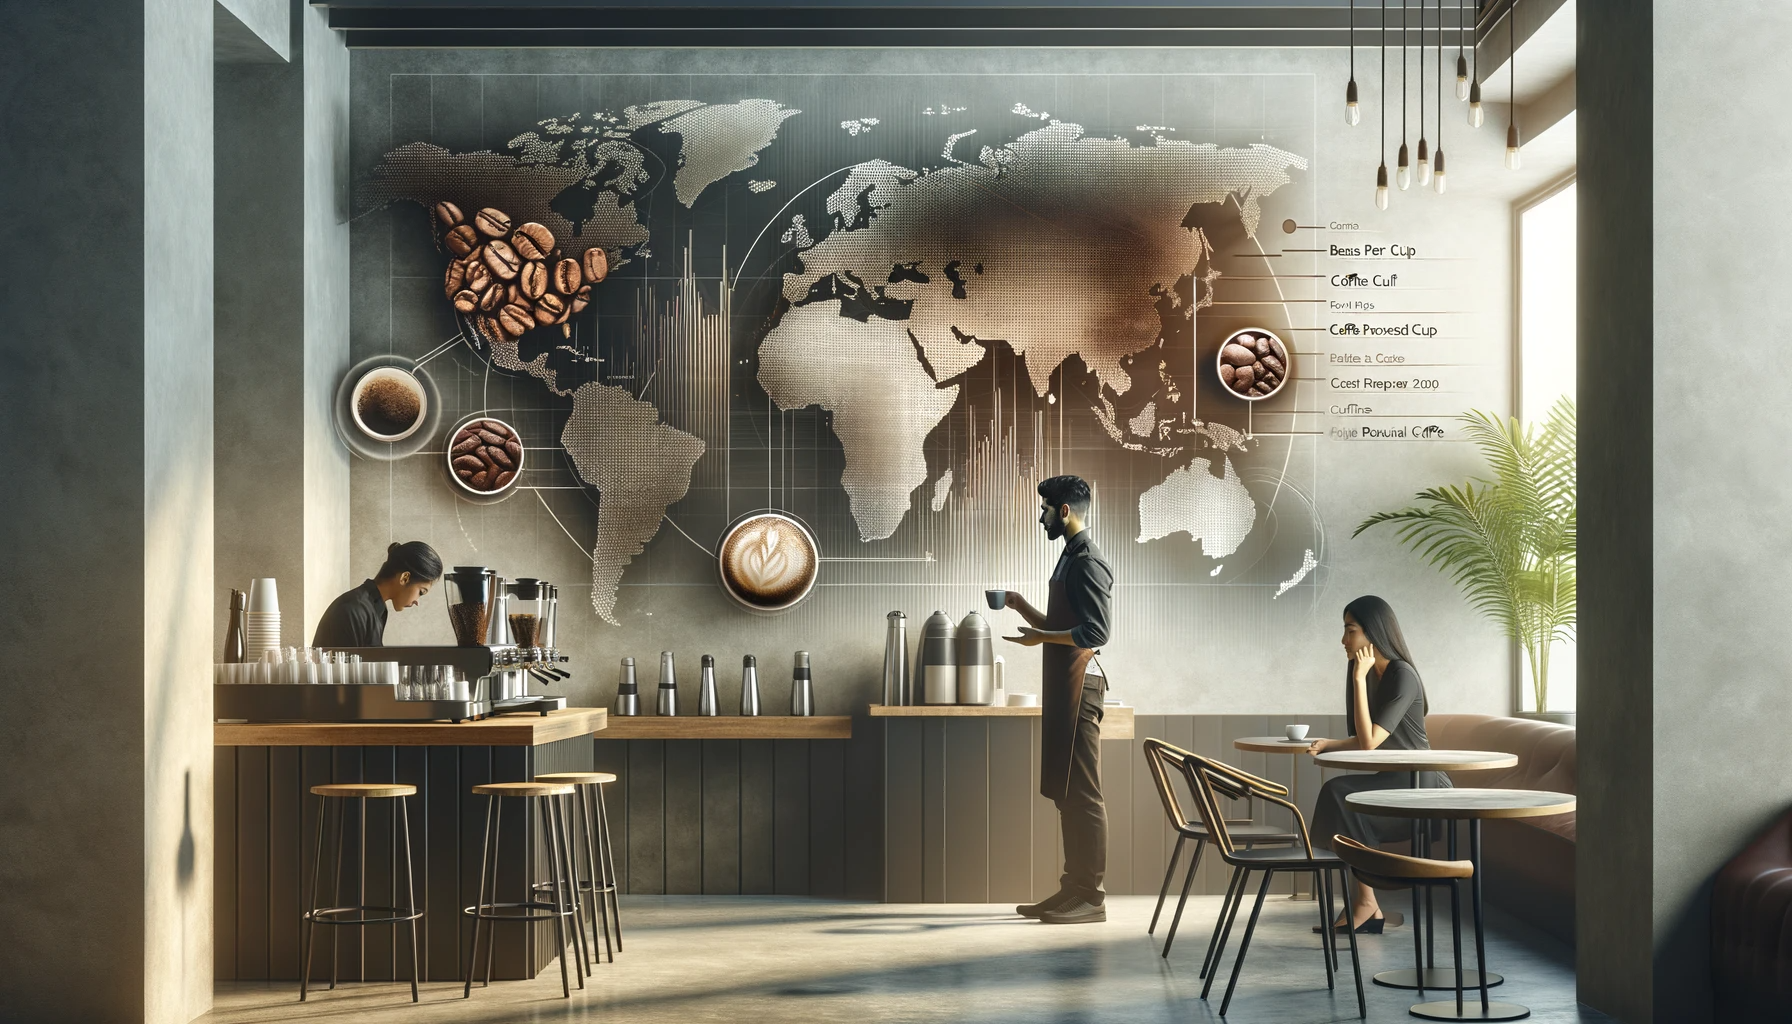 Contemporary coffee shop scene illustrating global coffee market trends and diverse customer base.